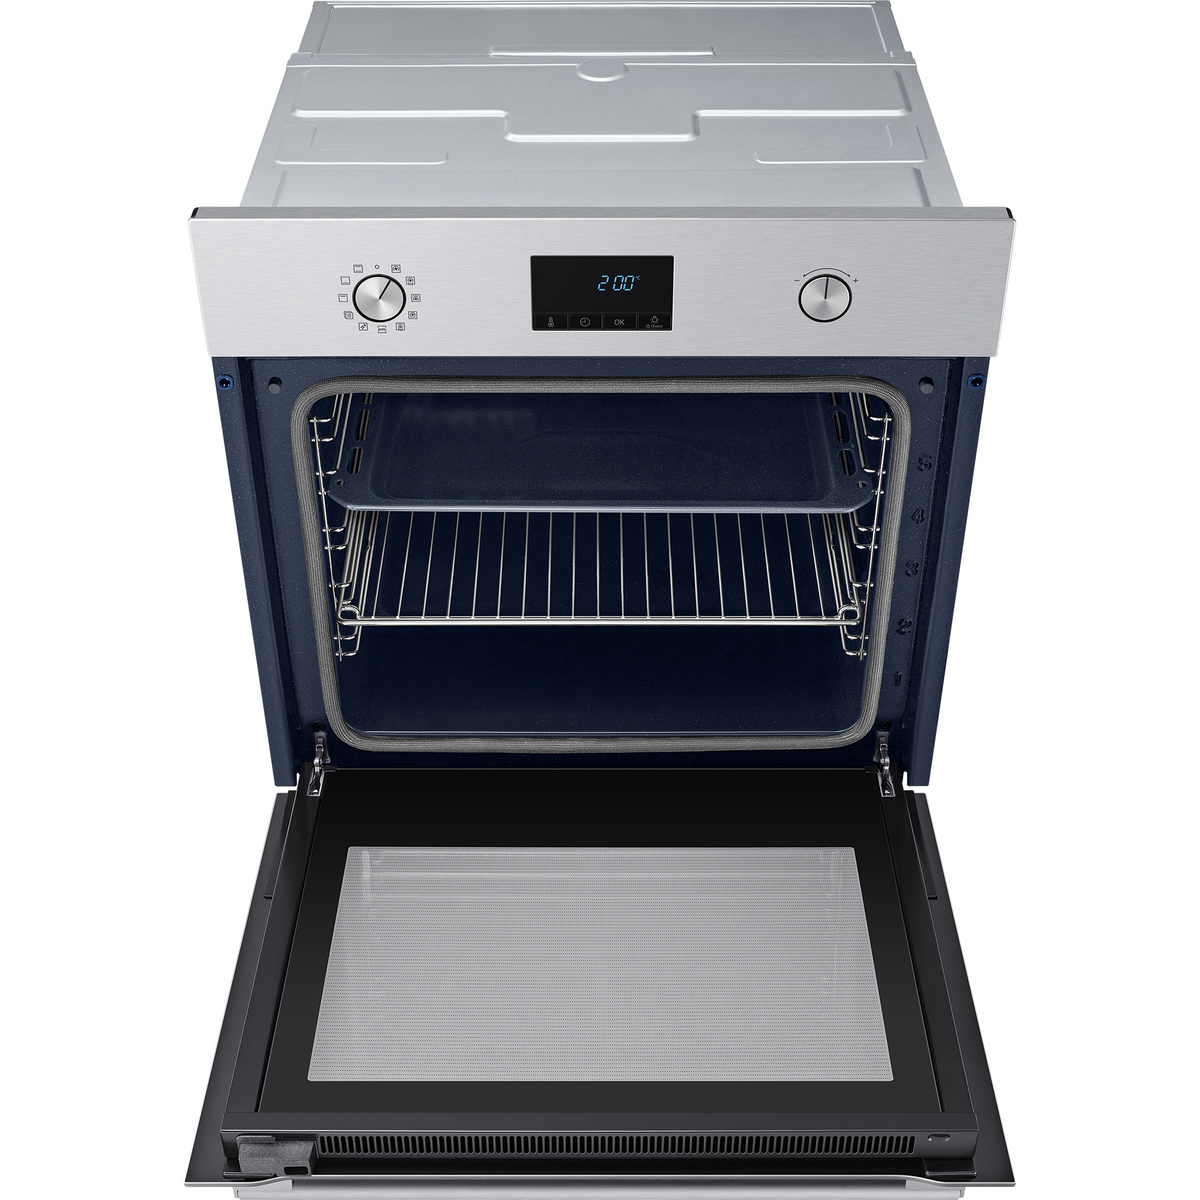 Samsung 68L Built-In Electric Single Oven - Stainless Steel | NV68A1170BS/EU from Samsung - DID Electrical